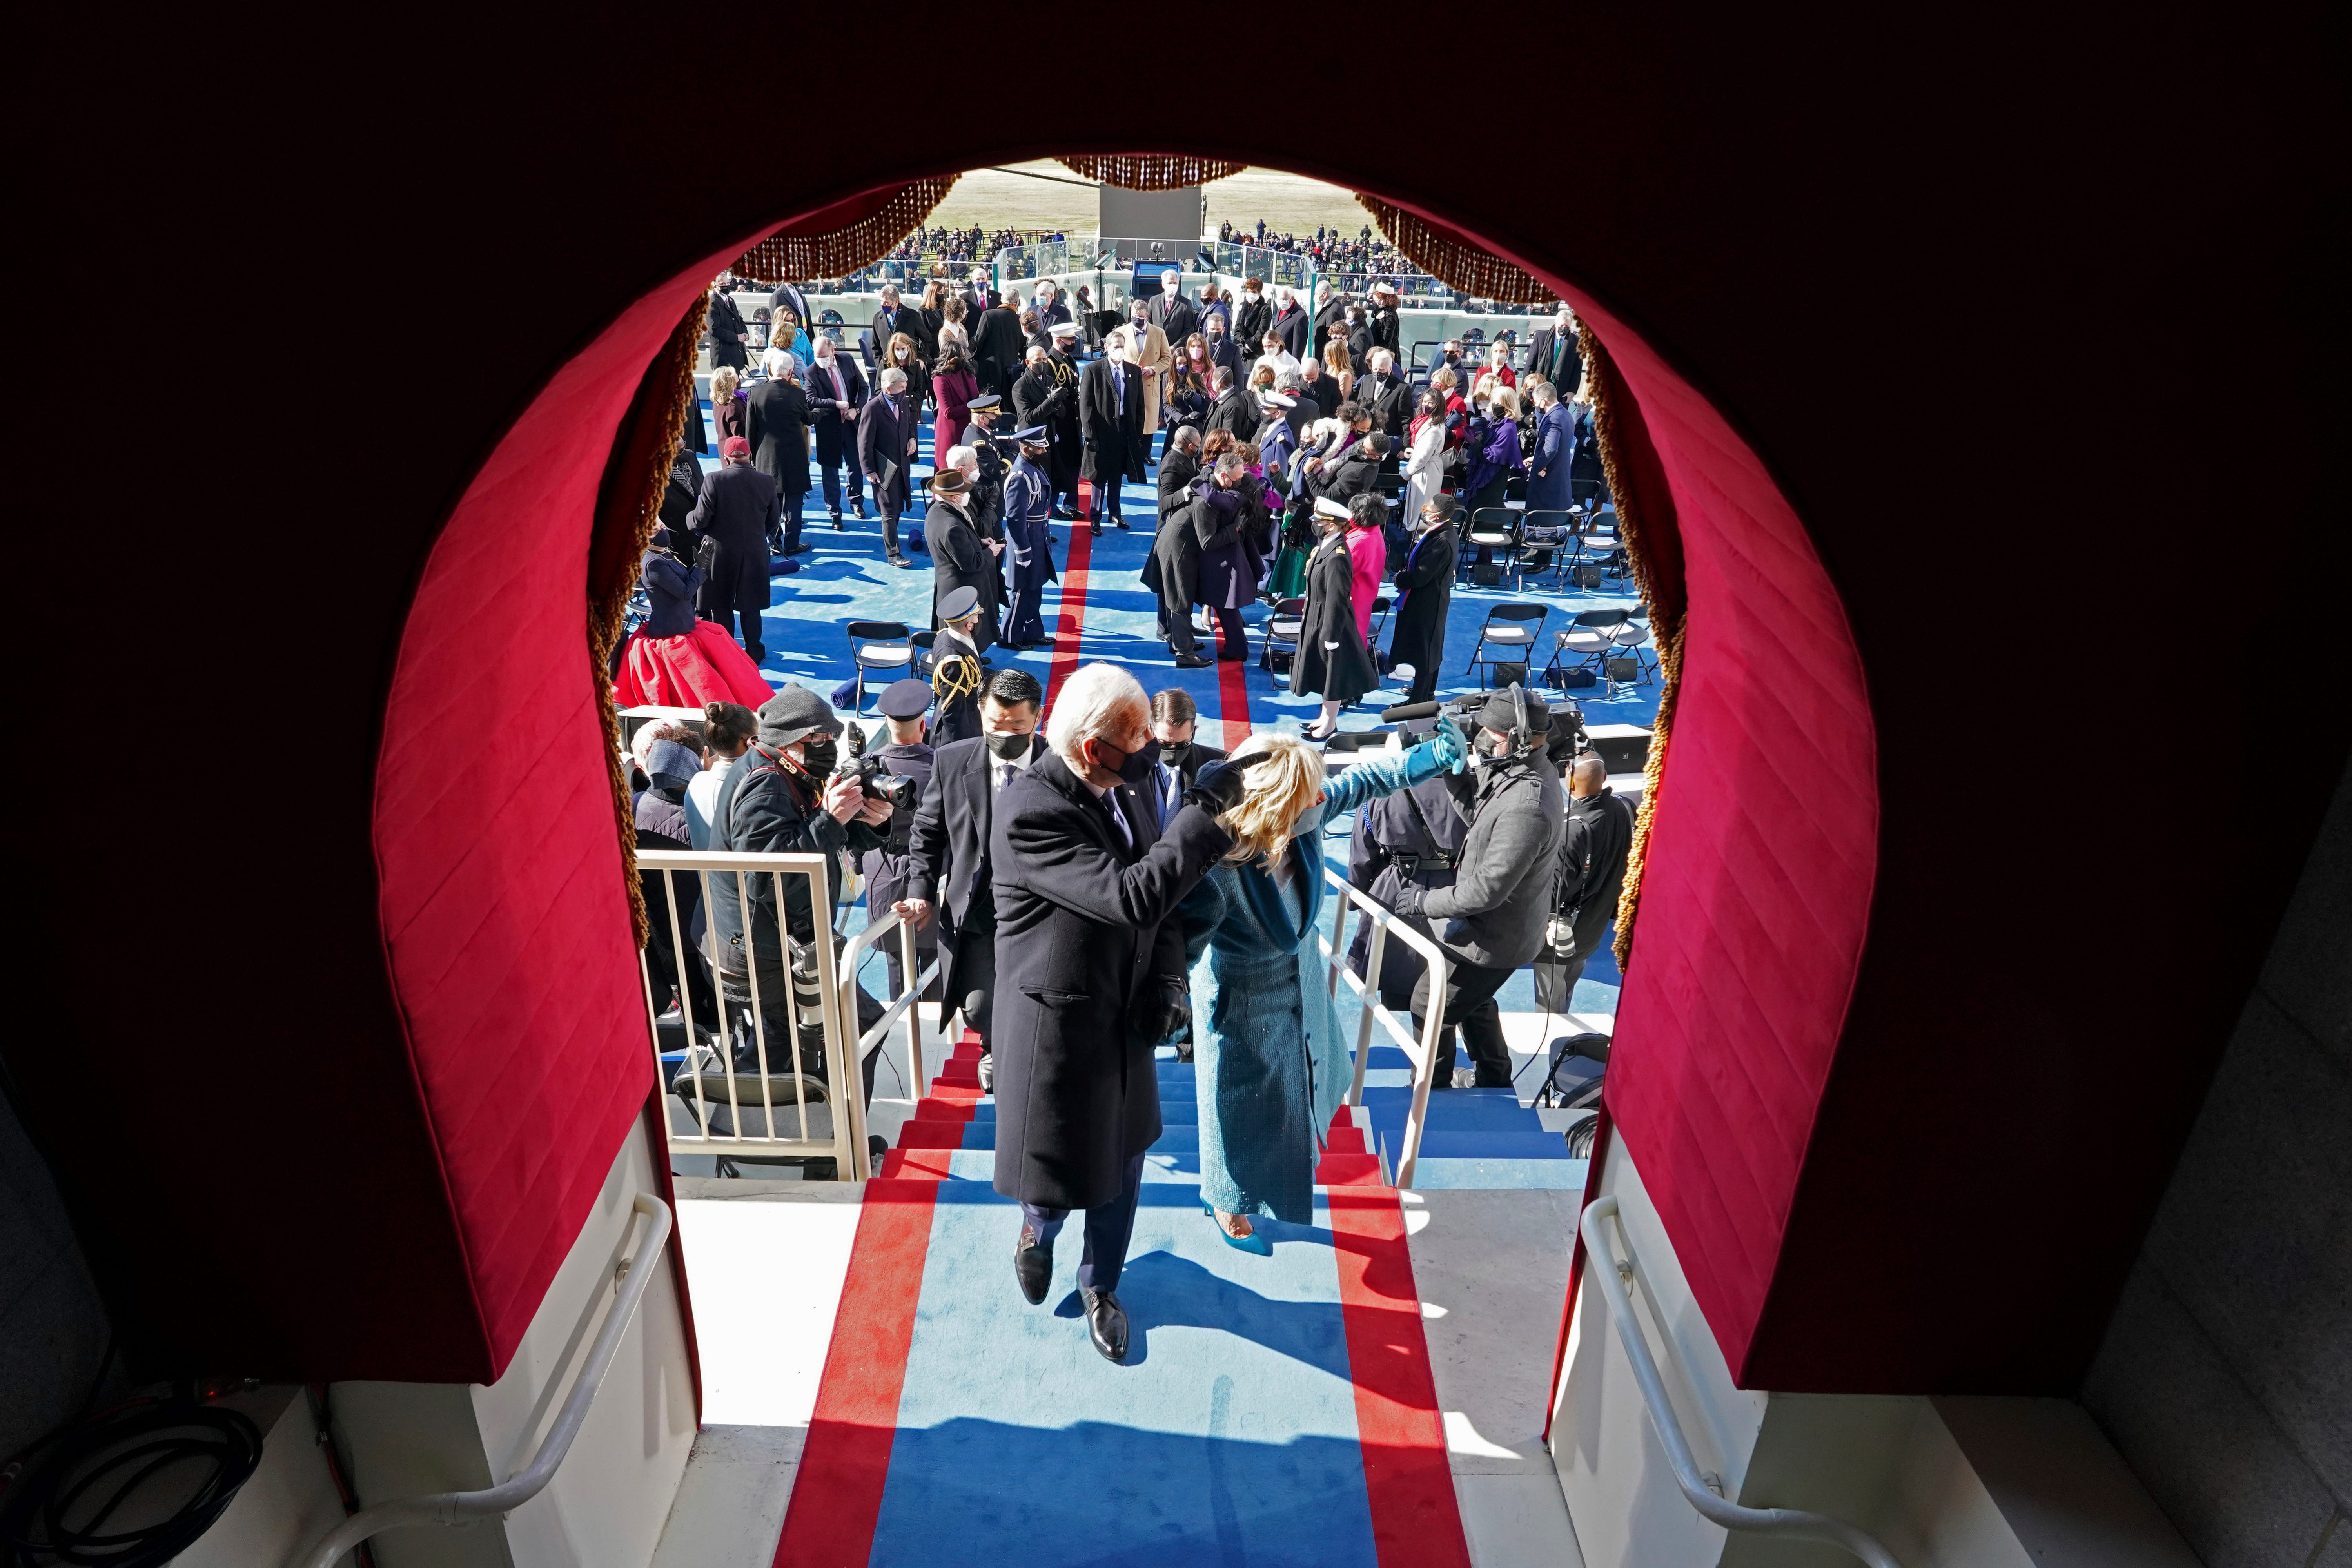 President Joe Biden and first lady Jill Biden gesture as they leave after his inauguration at the U.S. Capitol in Washington, Wednesday, Jan. 20, 2021.